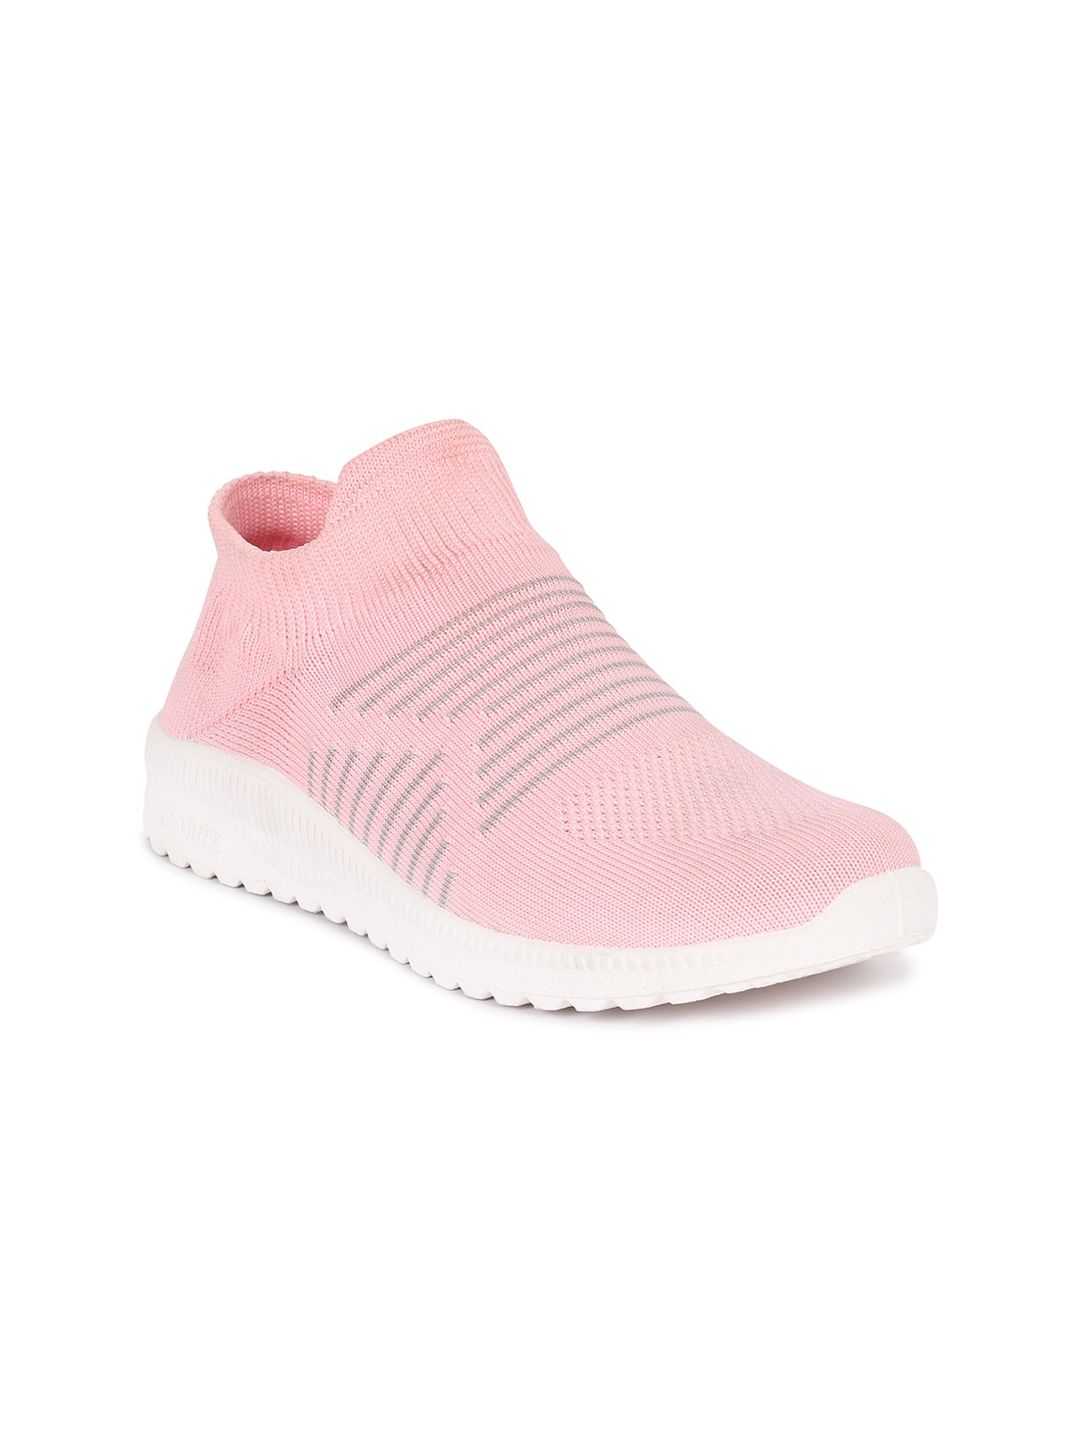 Bella Toes Women Pink Woven Design Slip-On Sneakers Price in India